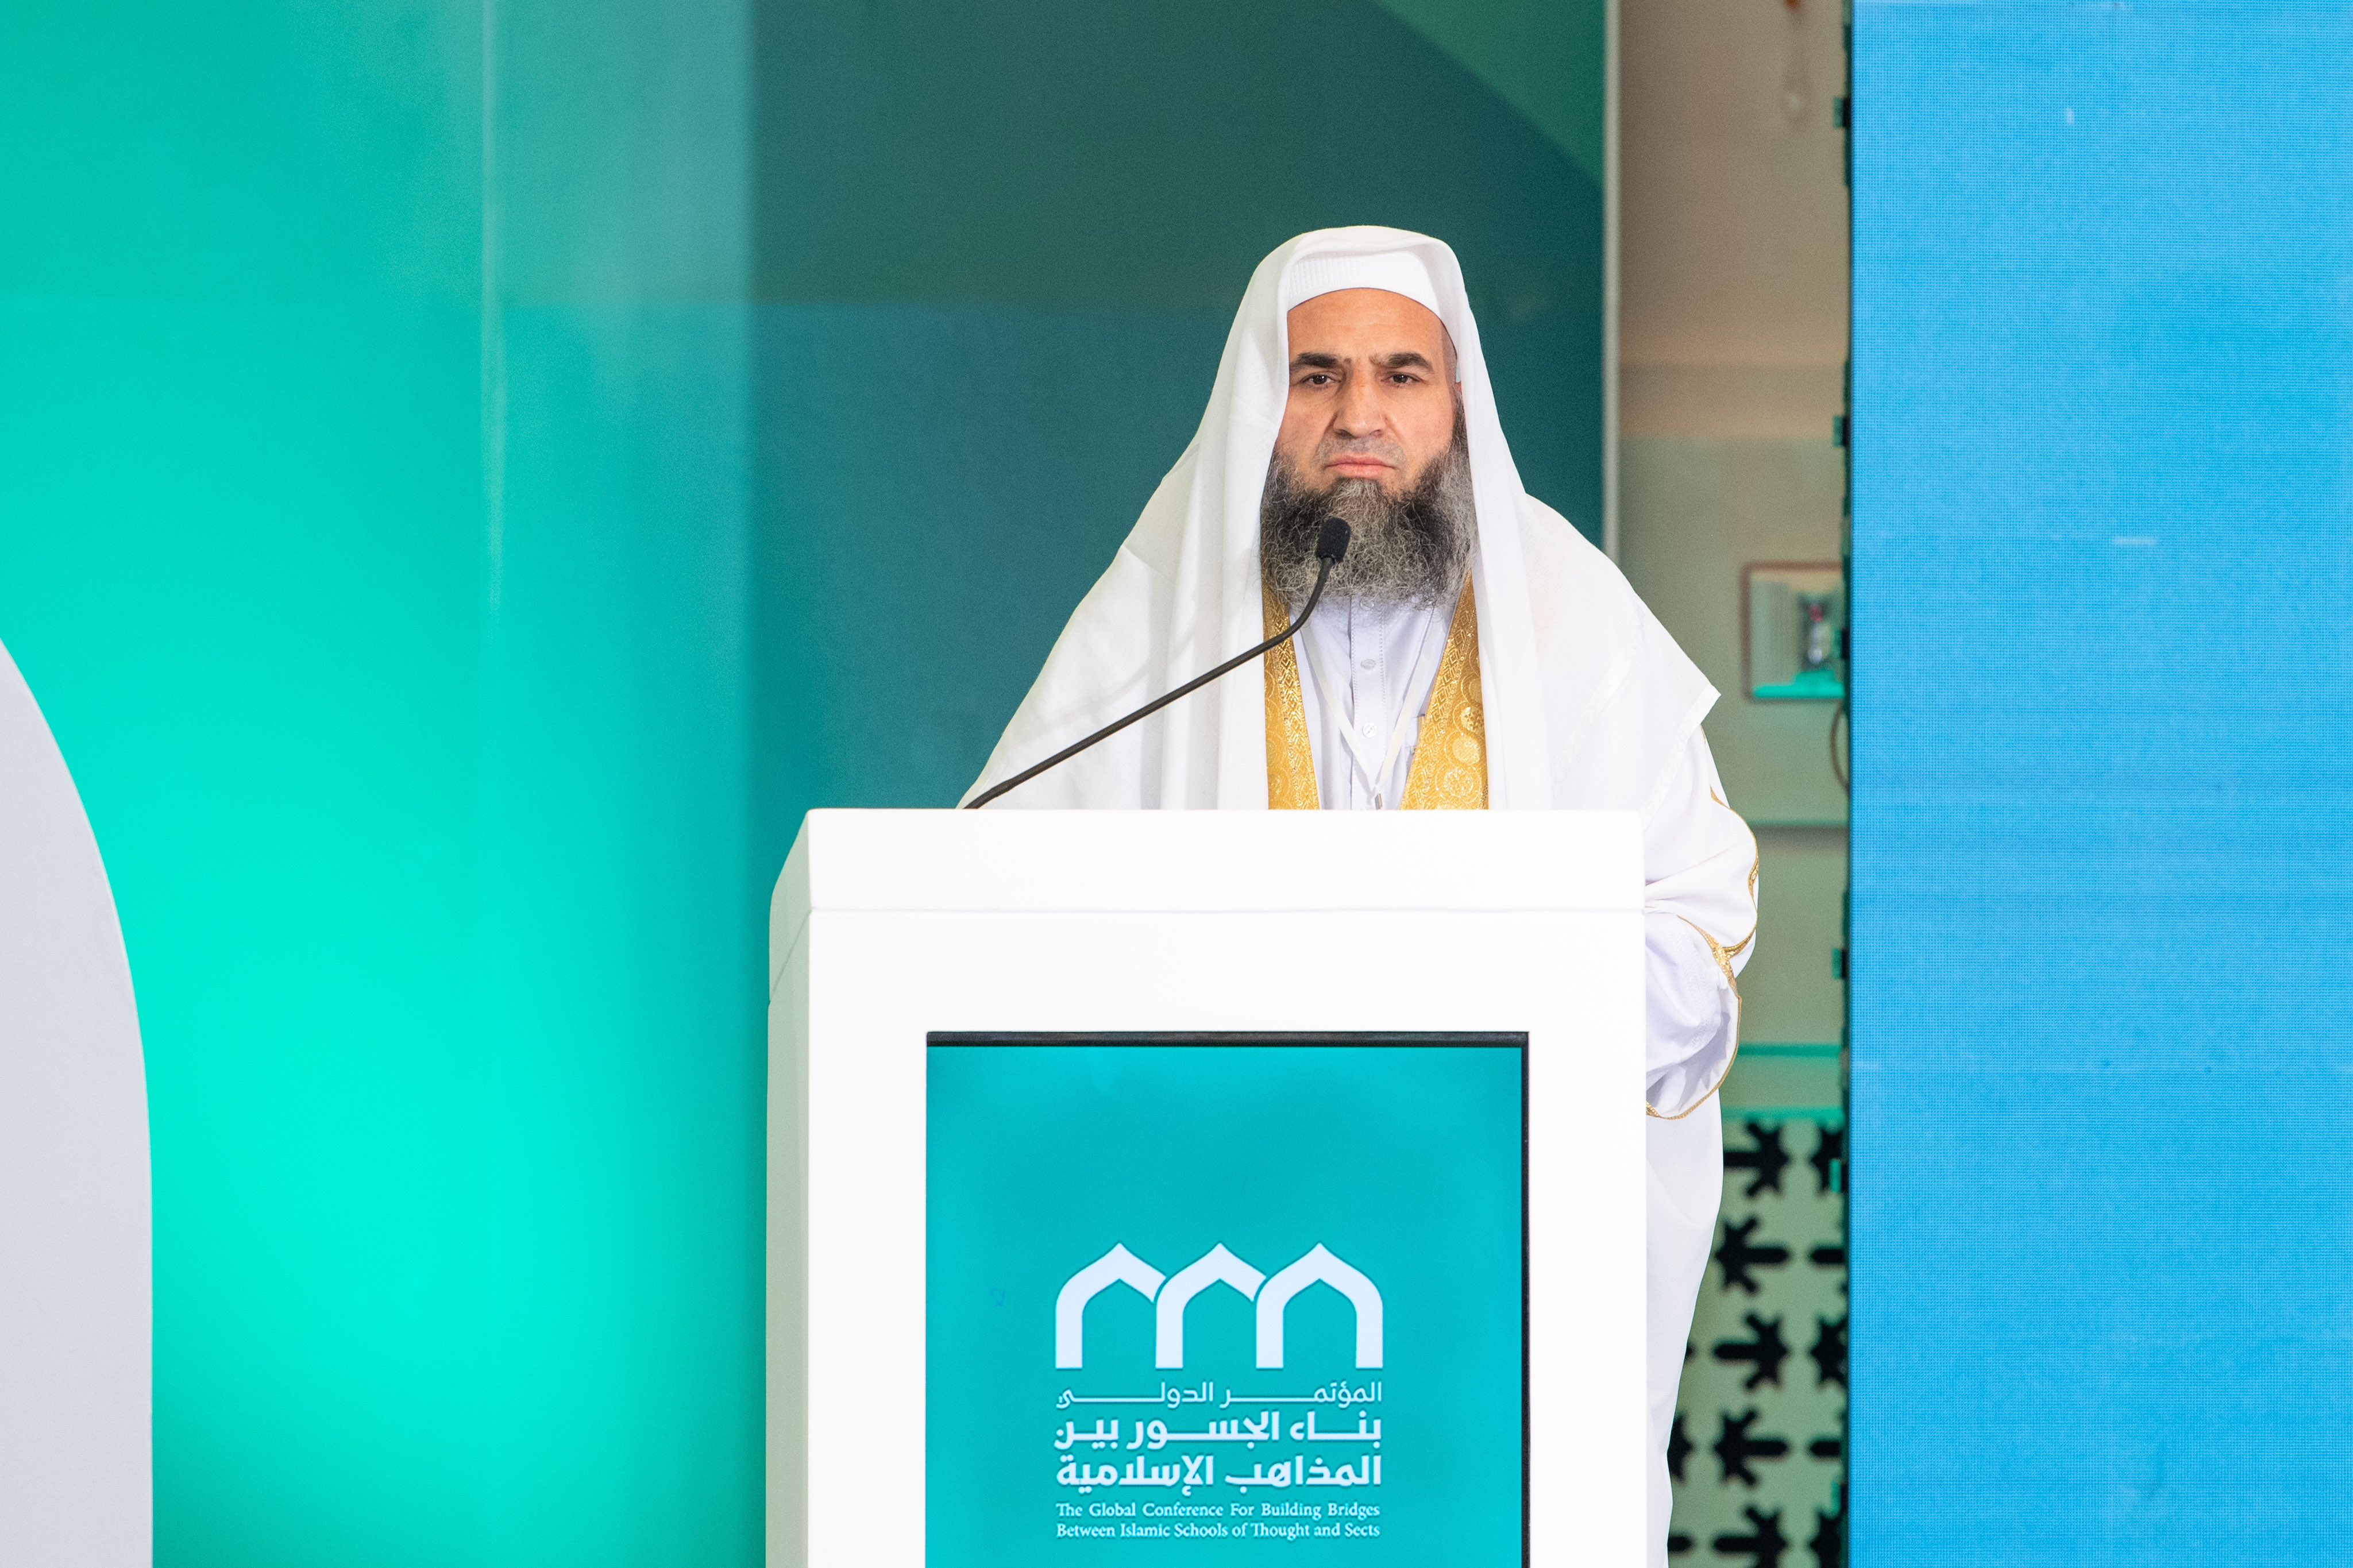 Remarks by His Eminence Sheikh Ahmad Shah Mukhlis, Professor at the Center of Quran and Sunnah in Jalalabad, Afghanistan, in his speech during the closing session at the Global Conference for Building Bridges between Islamic Schools of Thought and Sects: 